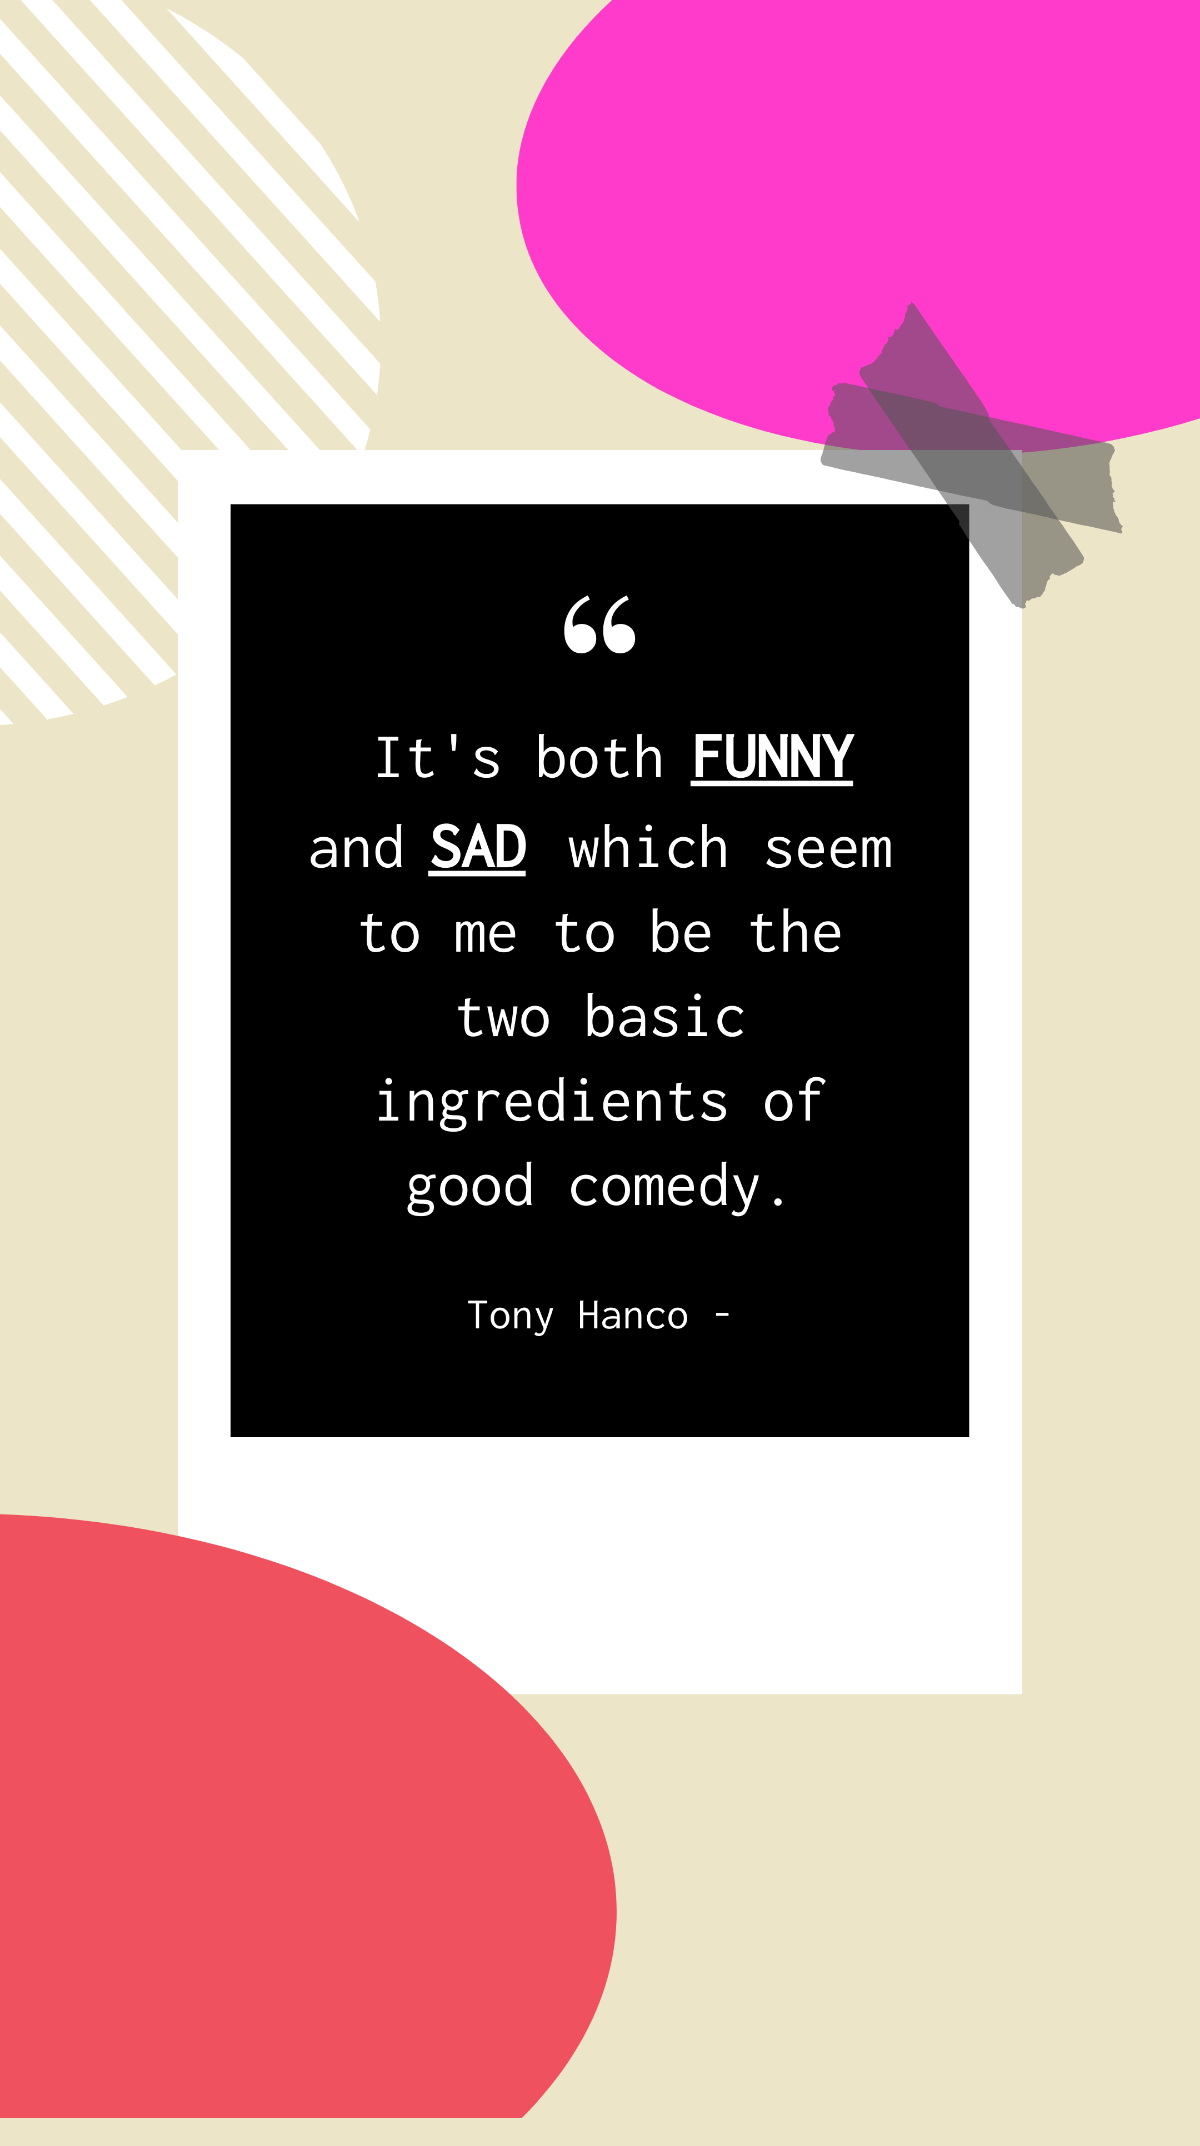 Tony Hanco - It's both funny and sad which seem to me to be the two basic ingredients of good comedy. Template